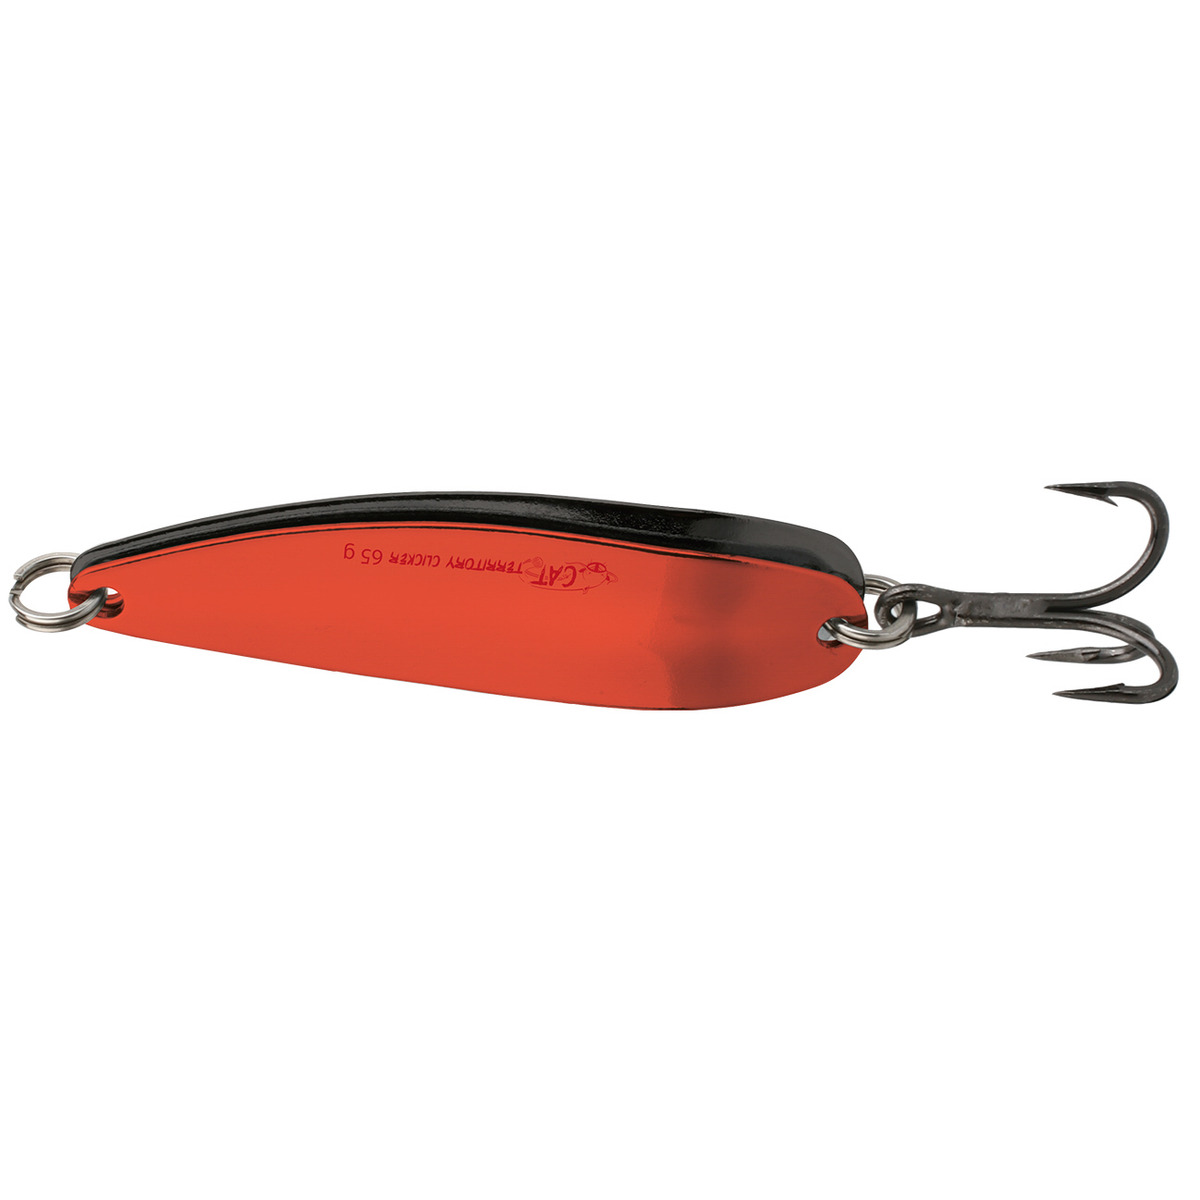 Mikado Spoonclicker - 65g / 11 cm  RED AND BLACK